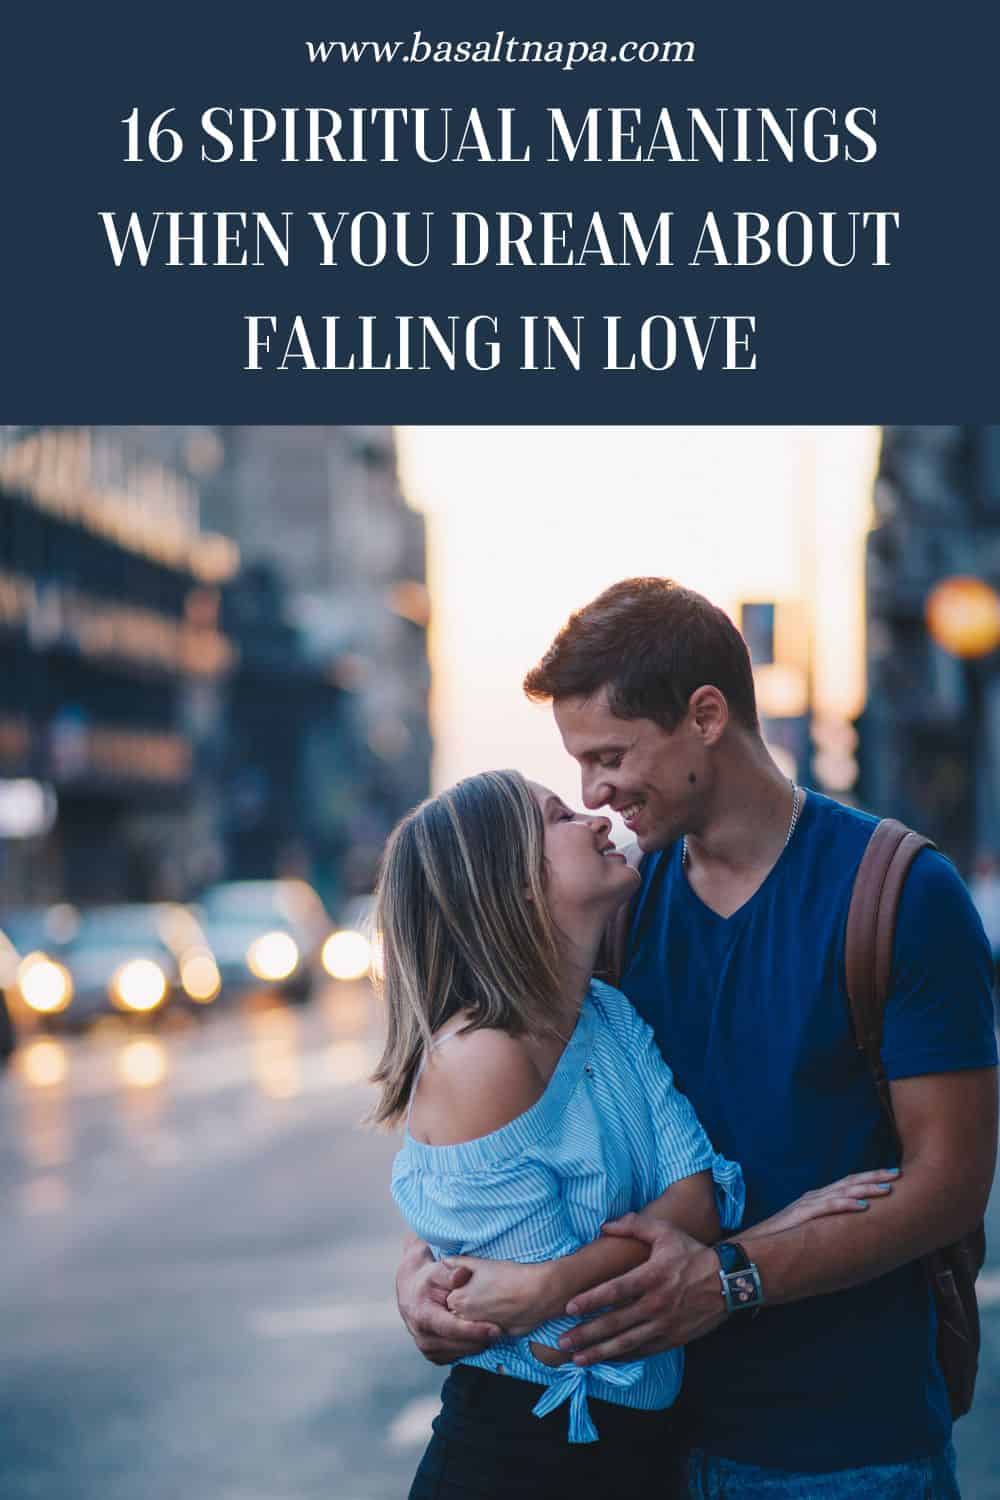 Common Interpretations of Dreams About Falling in Love